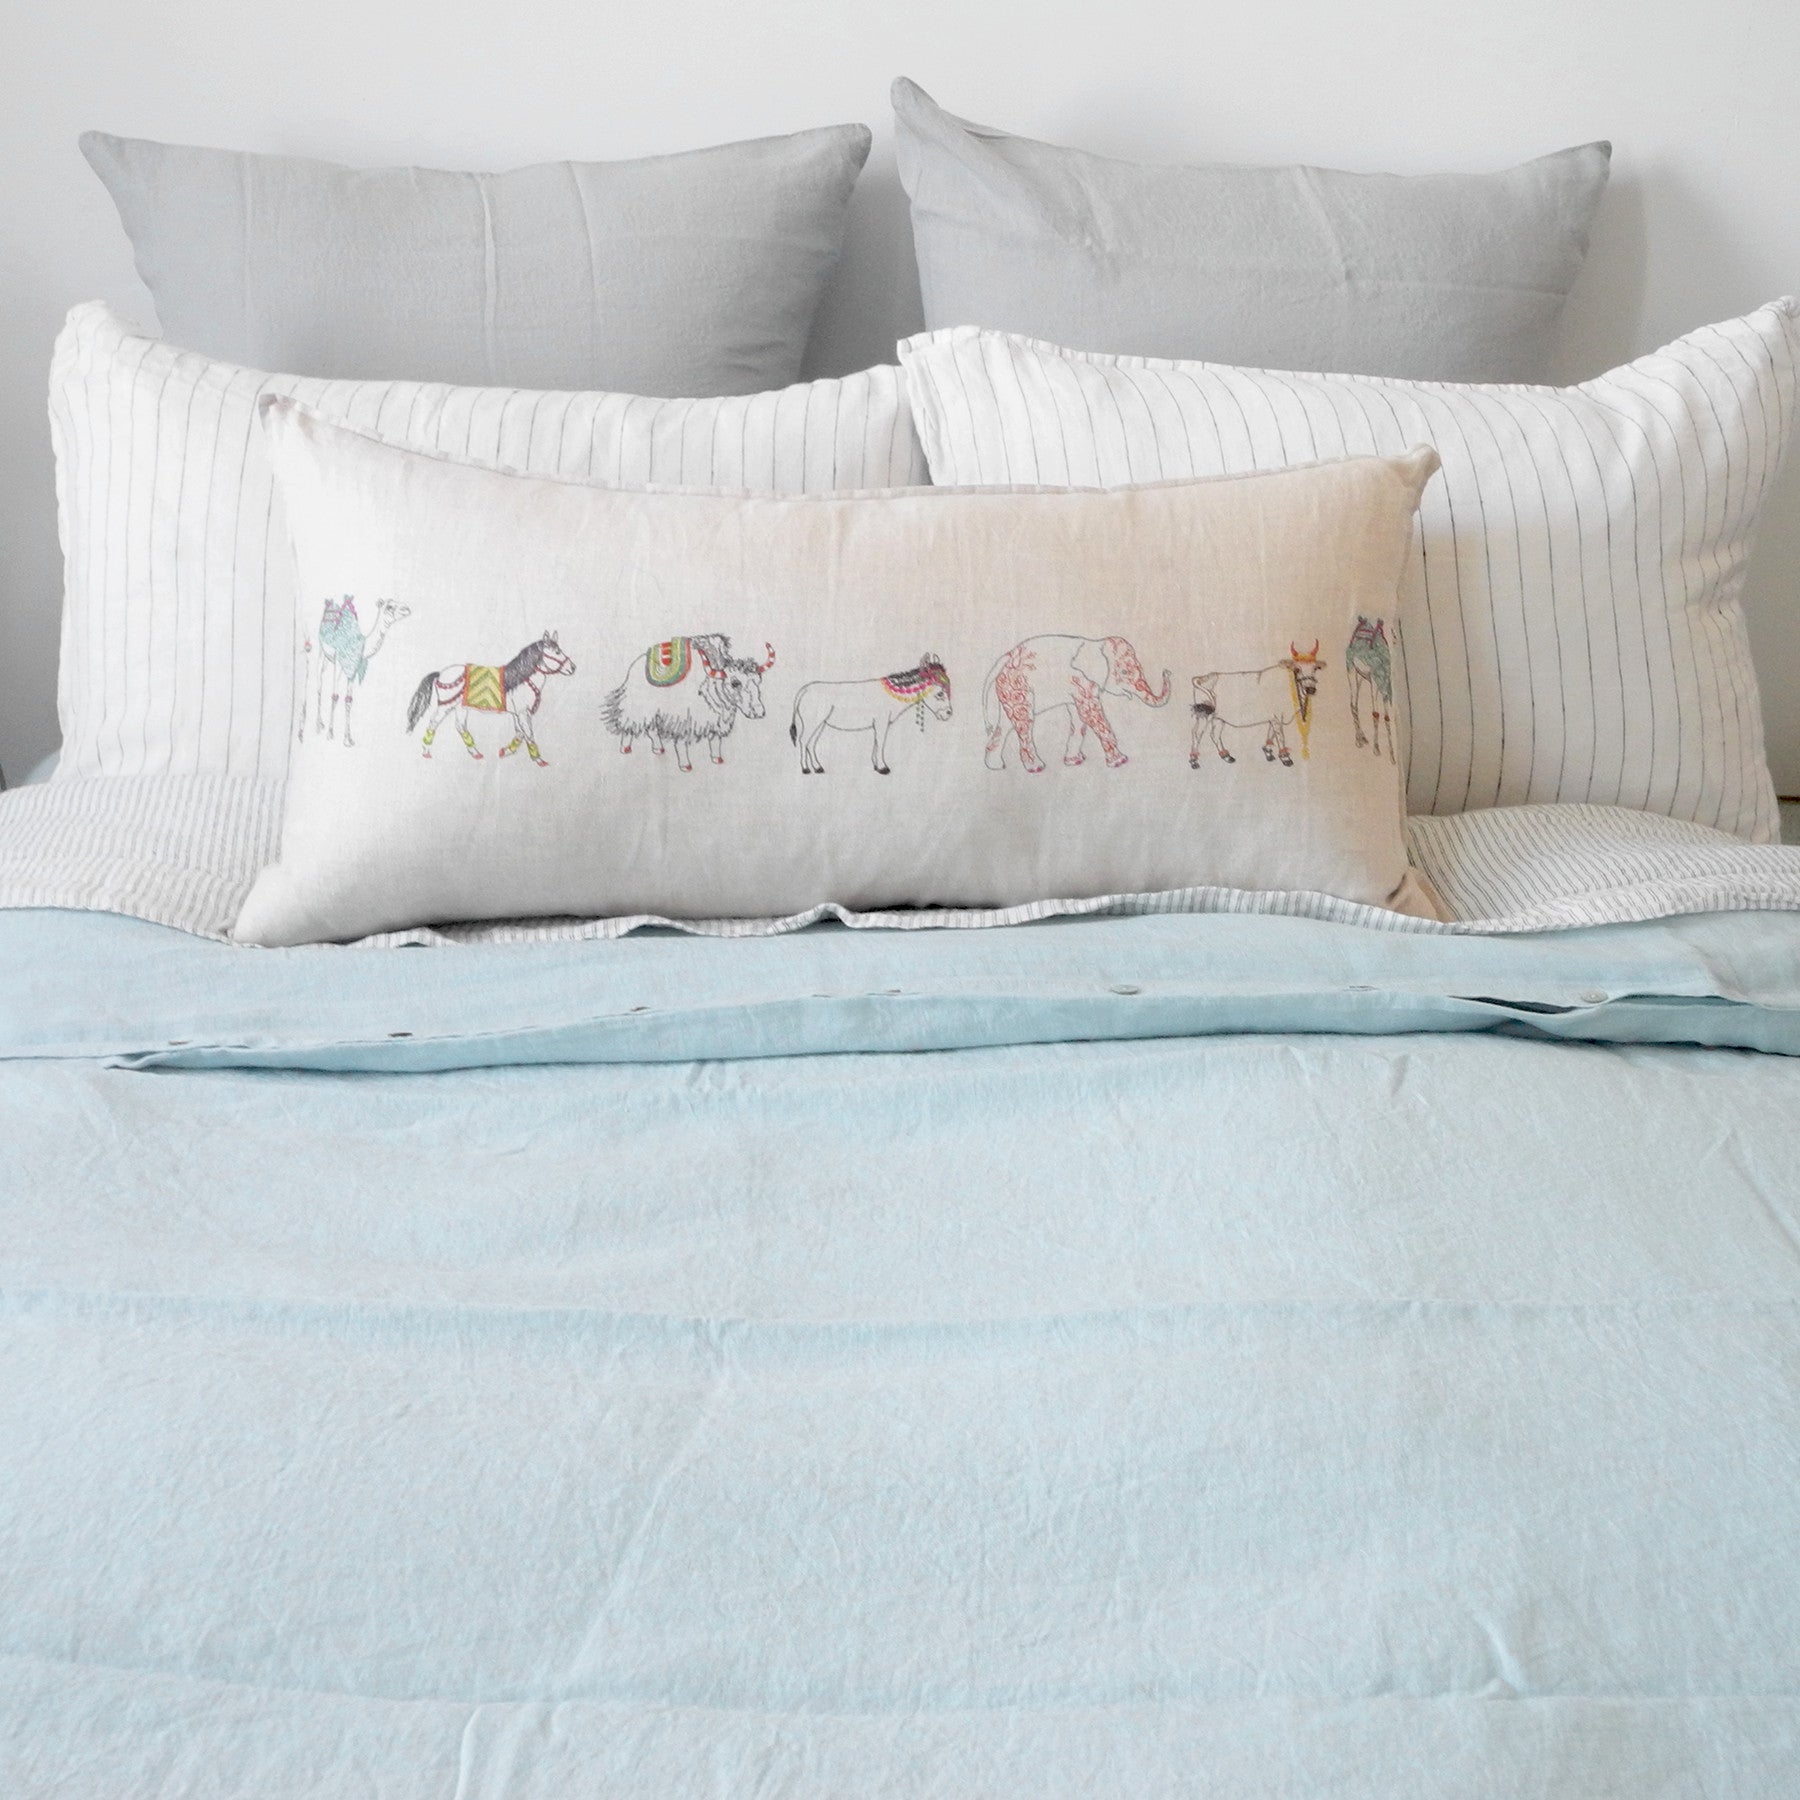 A Linge Particulier Linen Duvet in Pale Blue gives a light blue and robin&#39;s egg blue color to this duvet for a colorful linen bedding look from Collyer&#39;s Mansion